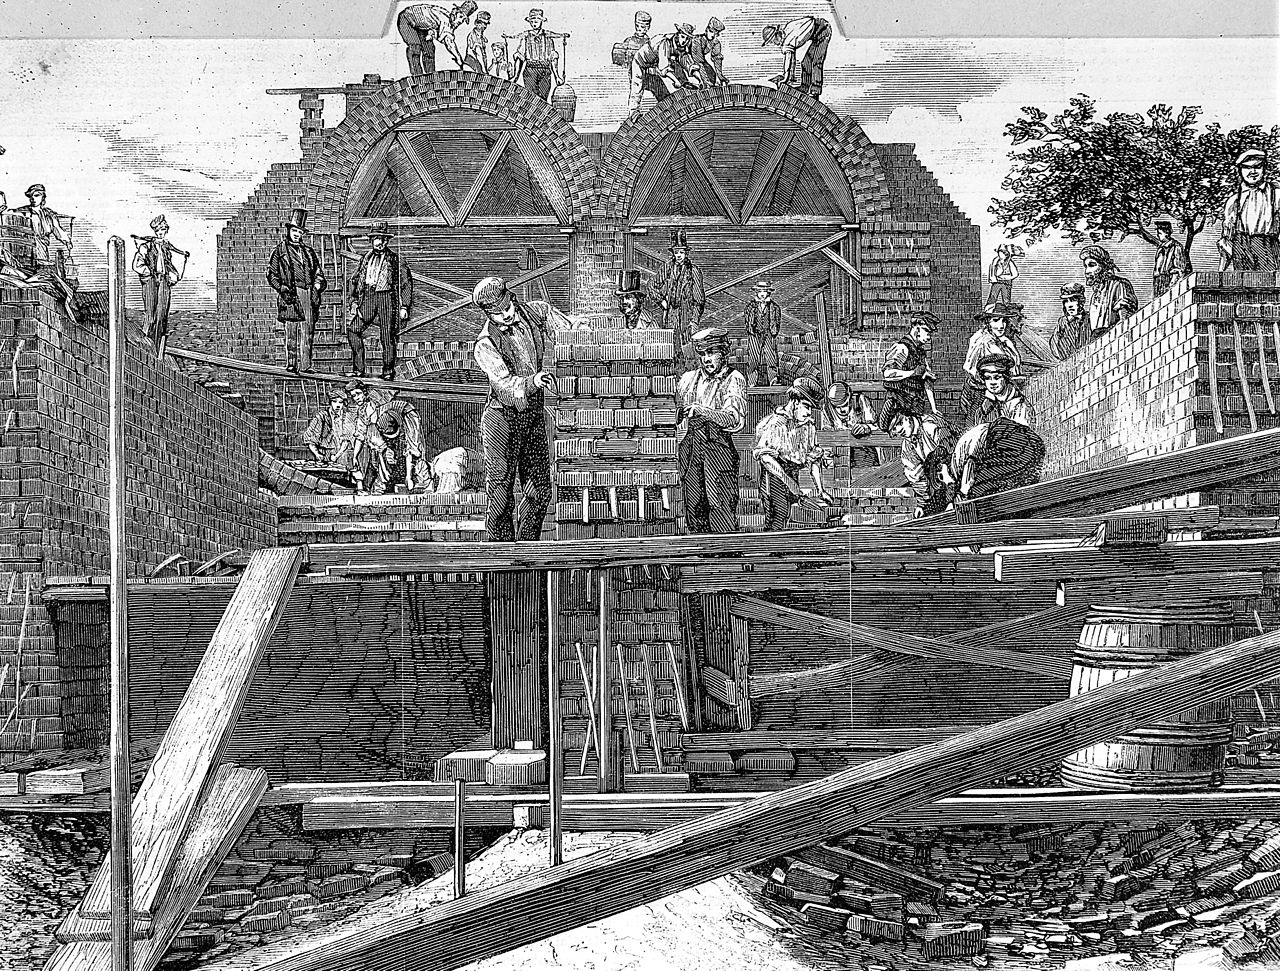 Construction of the sewers in 1859 in London